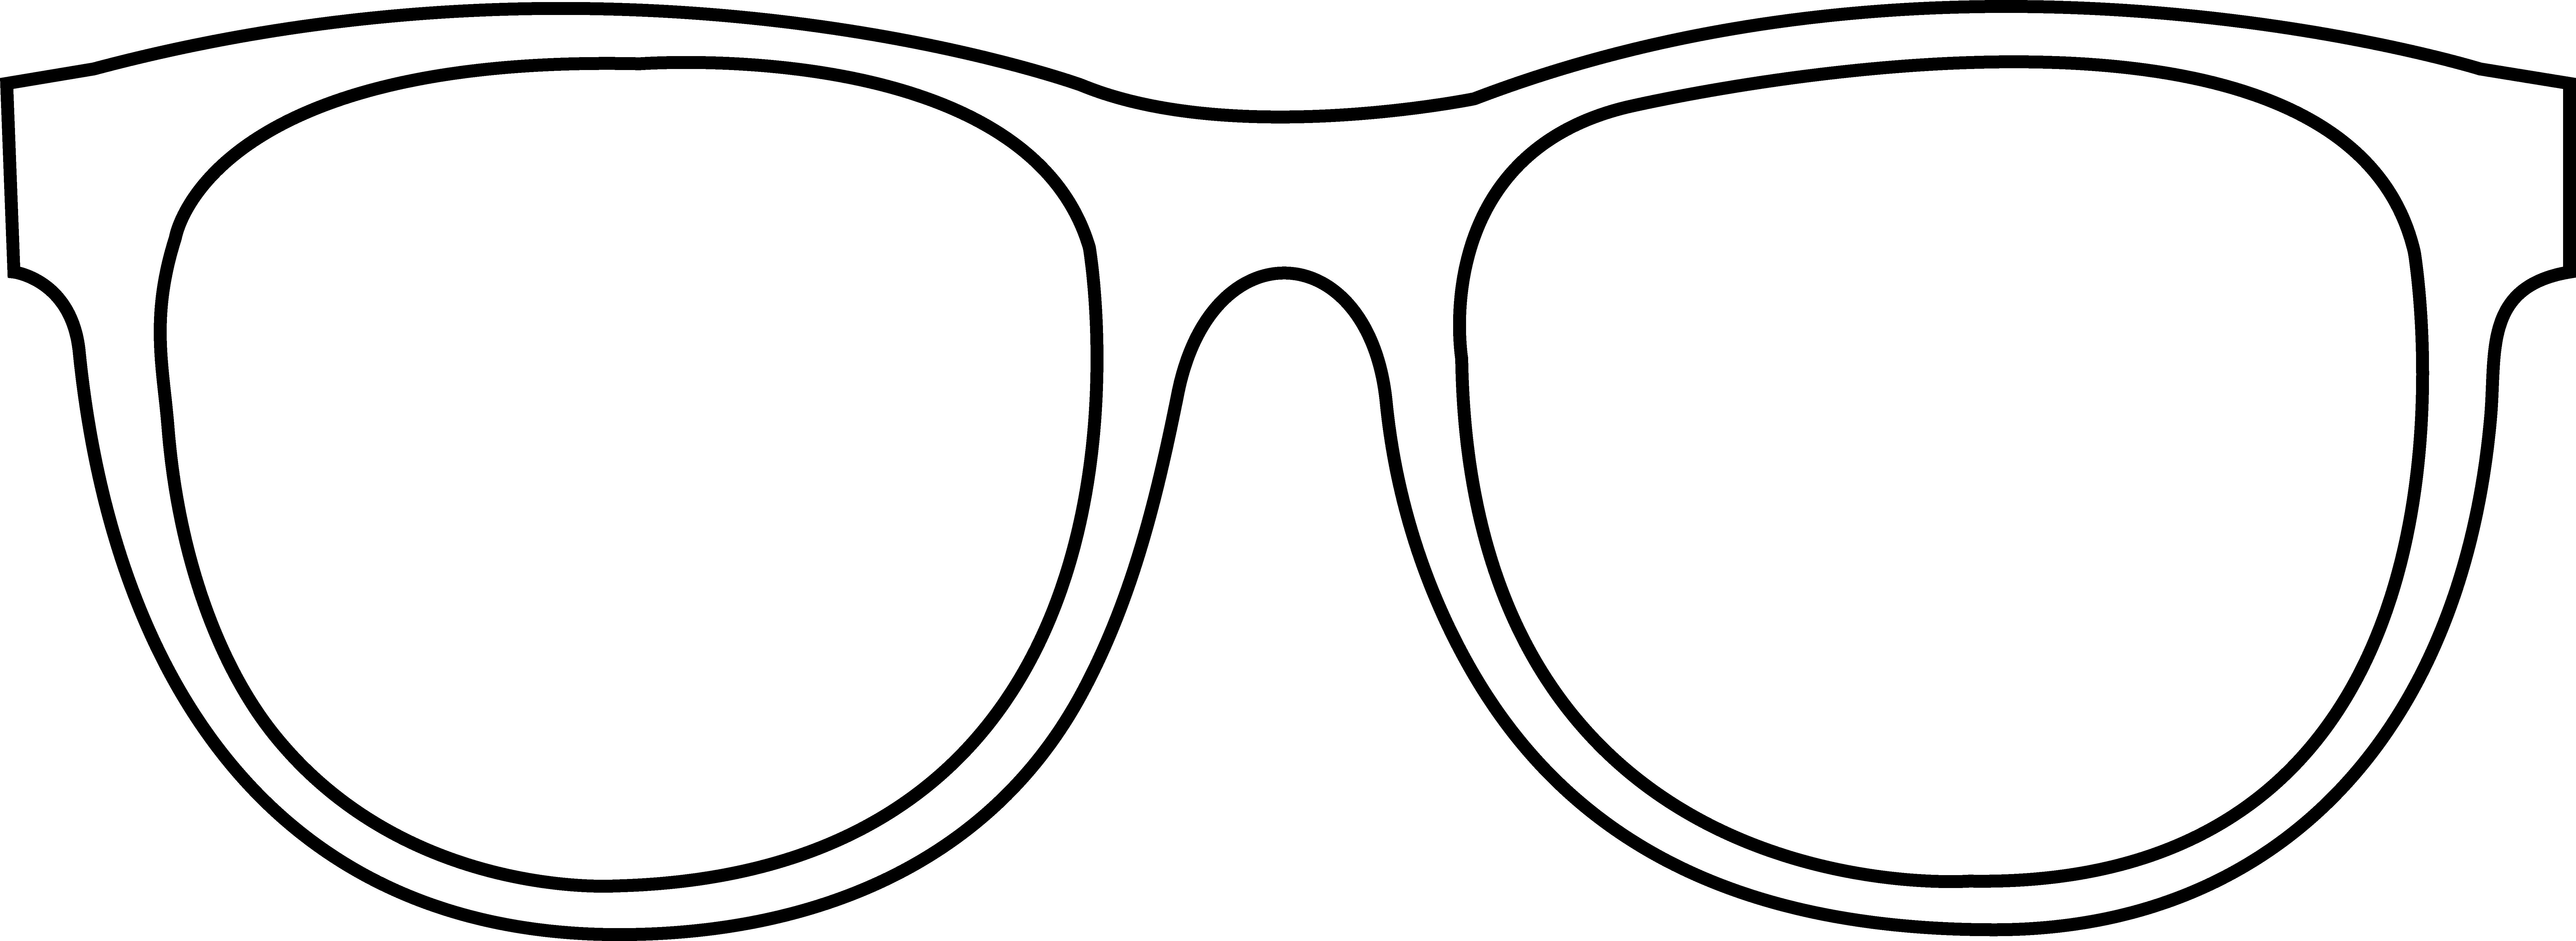 Glasses Clipart Black And White | Clipart Panda - Free Clipart Images